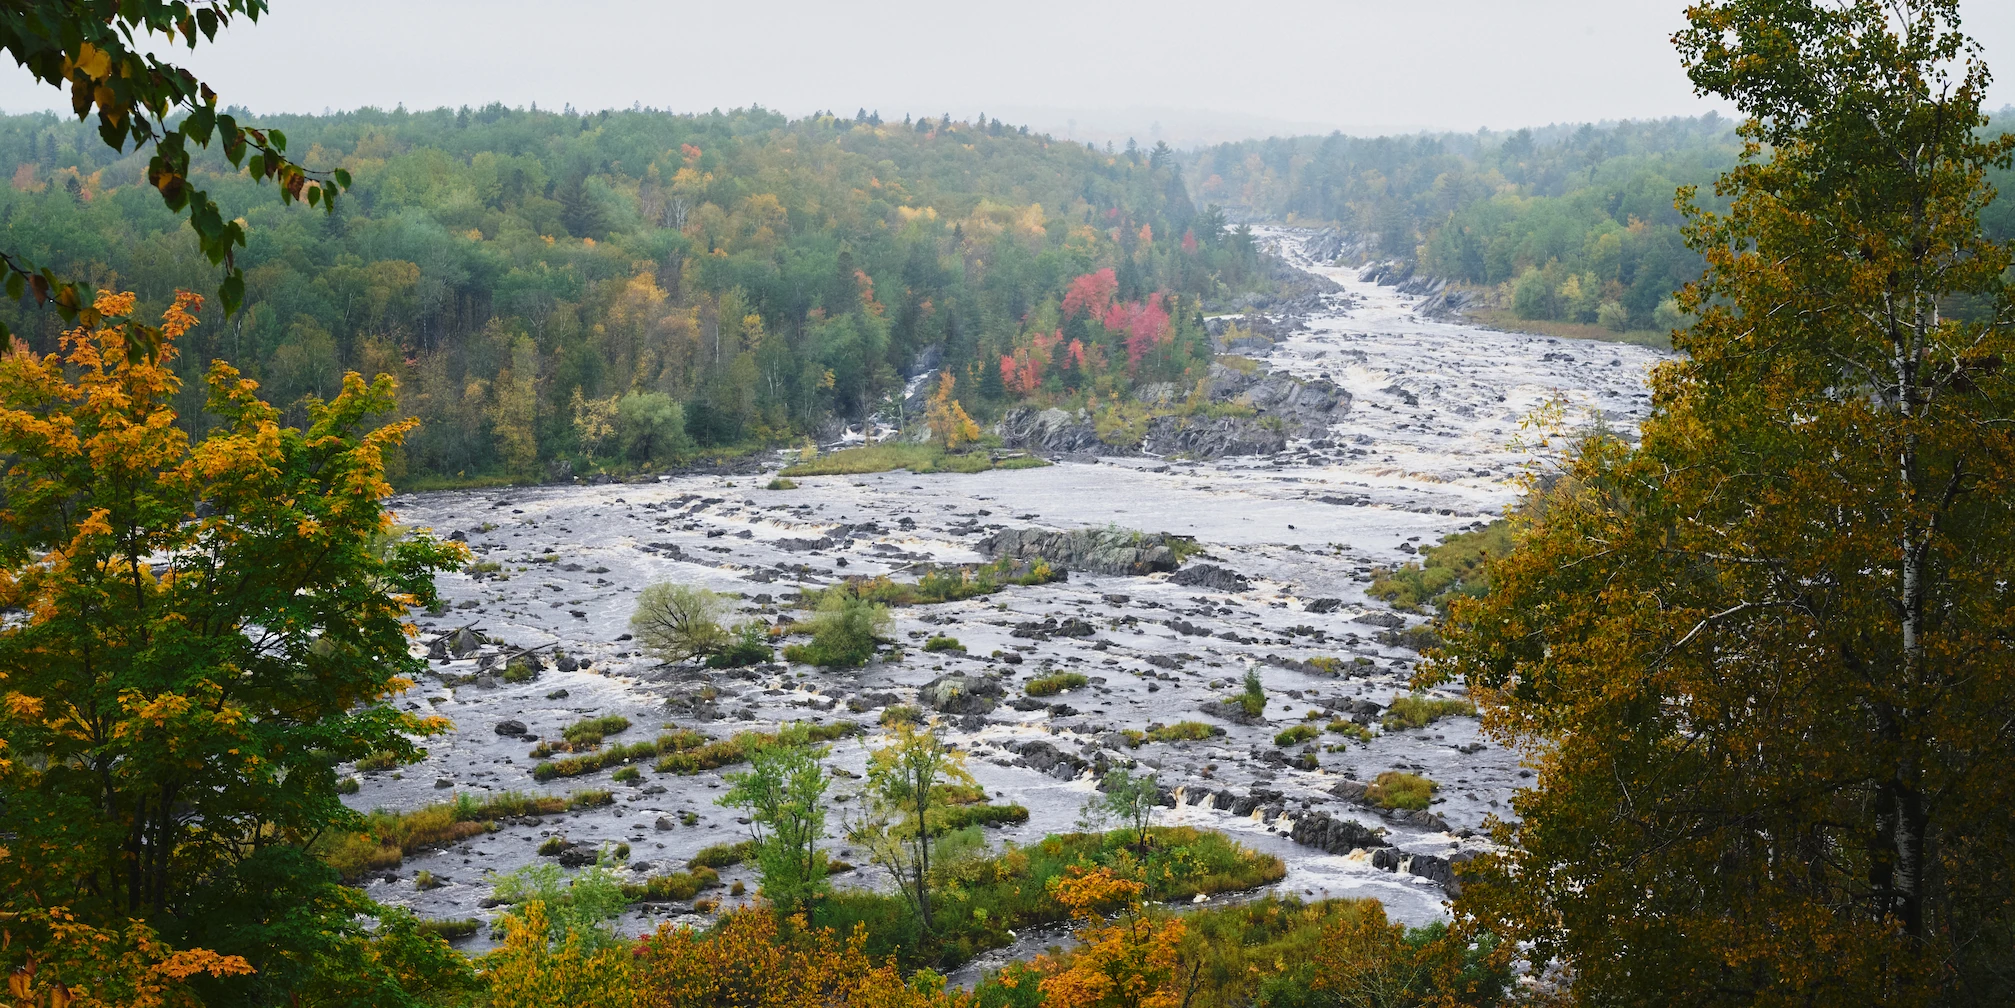 A river cuts through thick, autumn forest. Wide shot from above, with trees in the foreground.